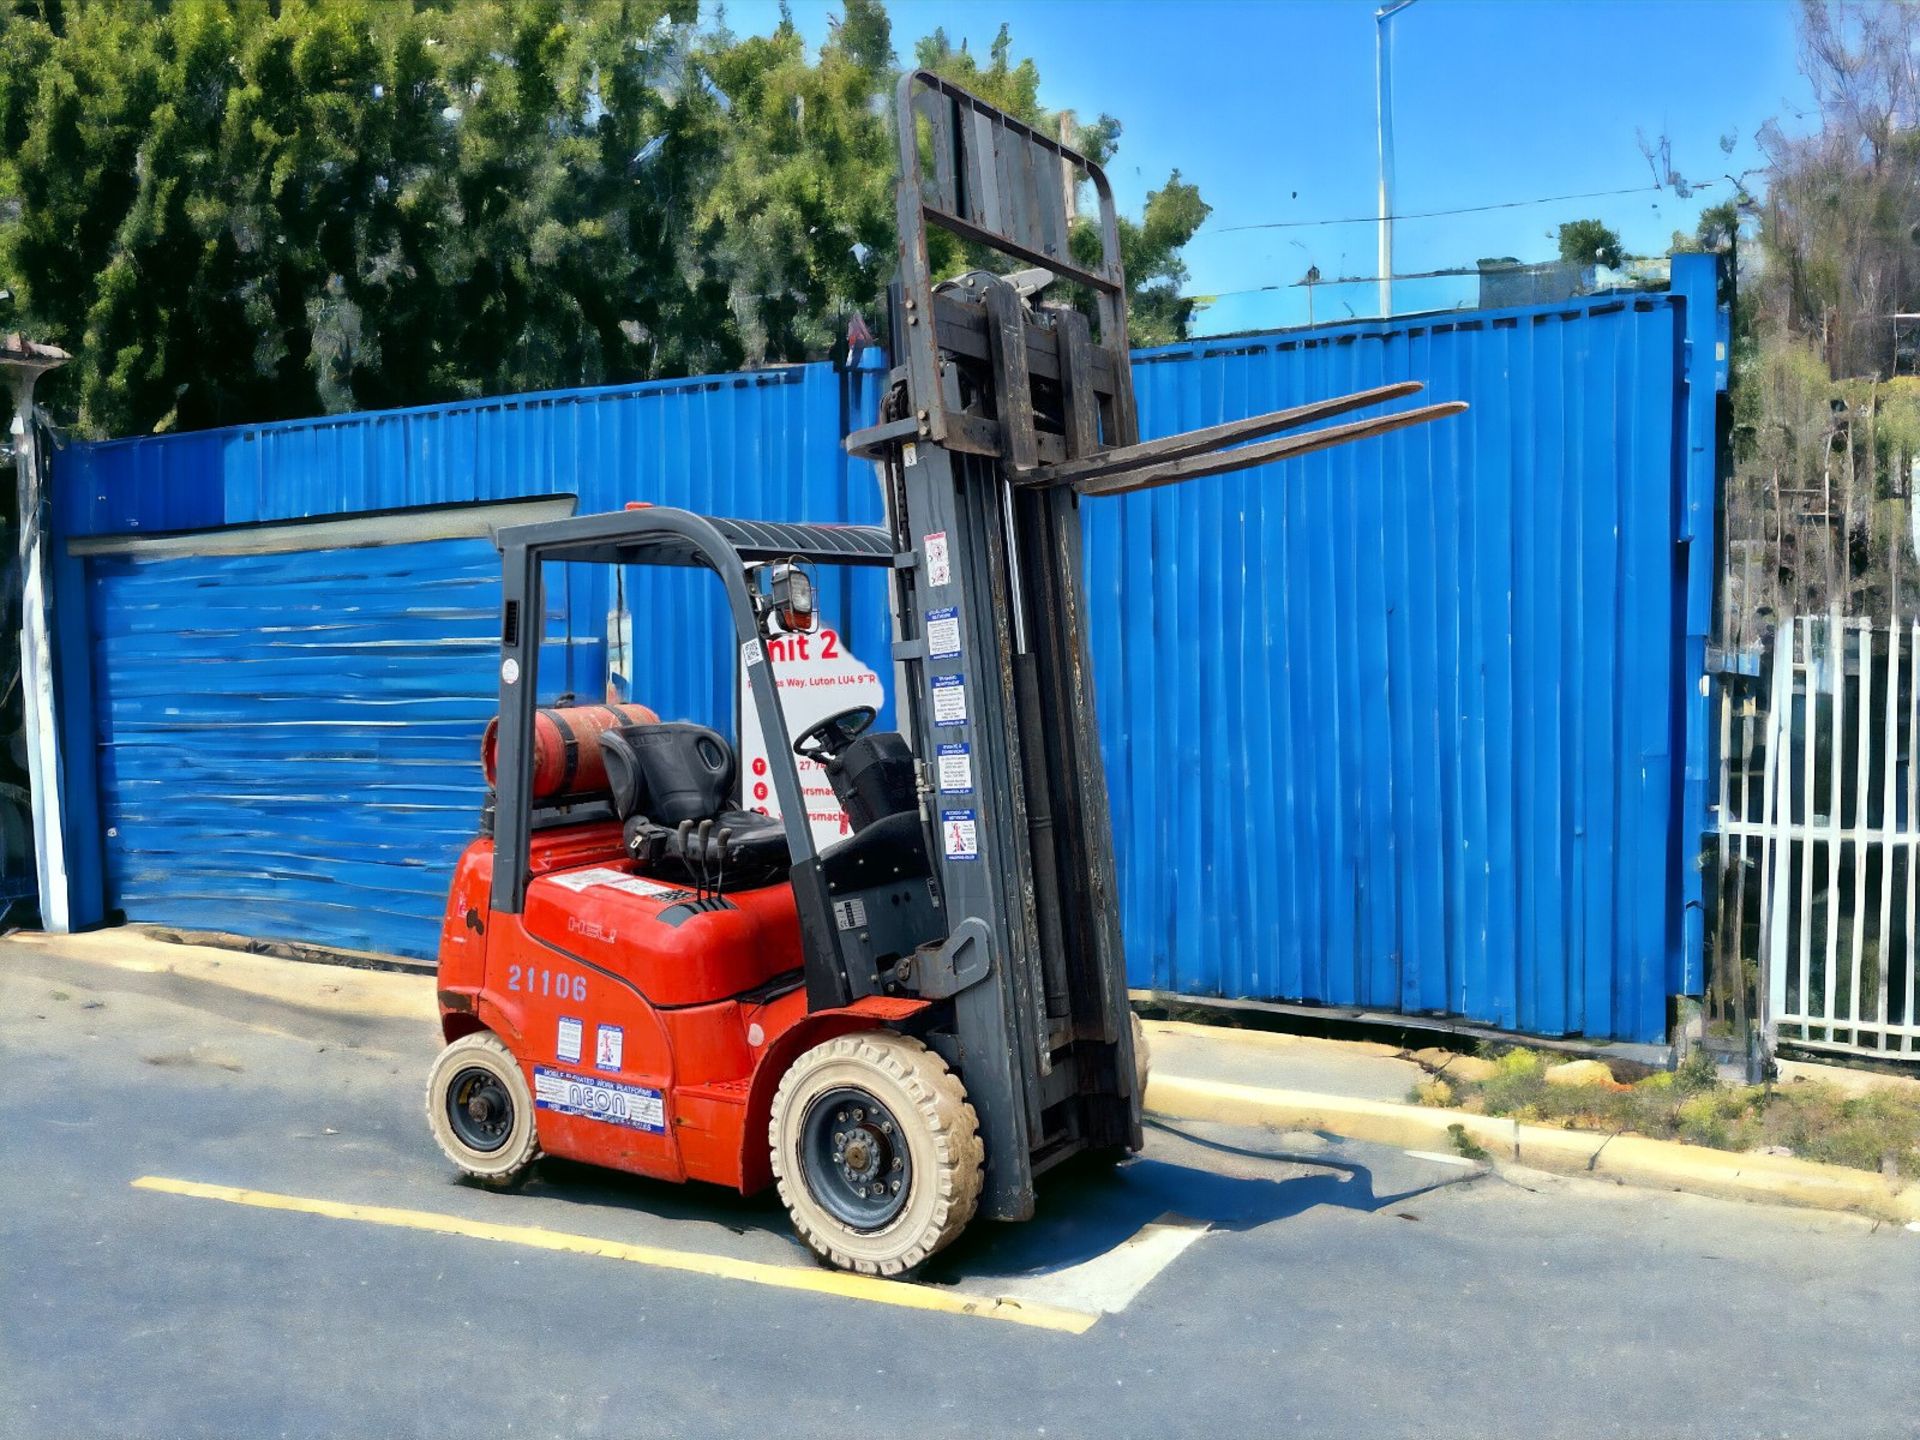 "EFFICIENCY ELEVATED: 2015 HELI FG20G LPG FORKLIFT - LOW HOURS, HIGH CAPACITY" - Image 7 of 9